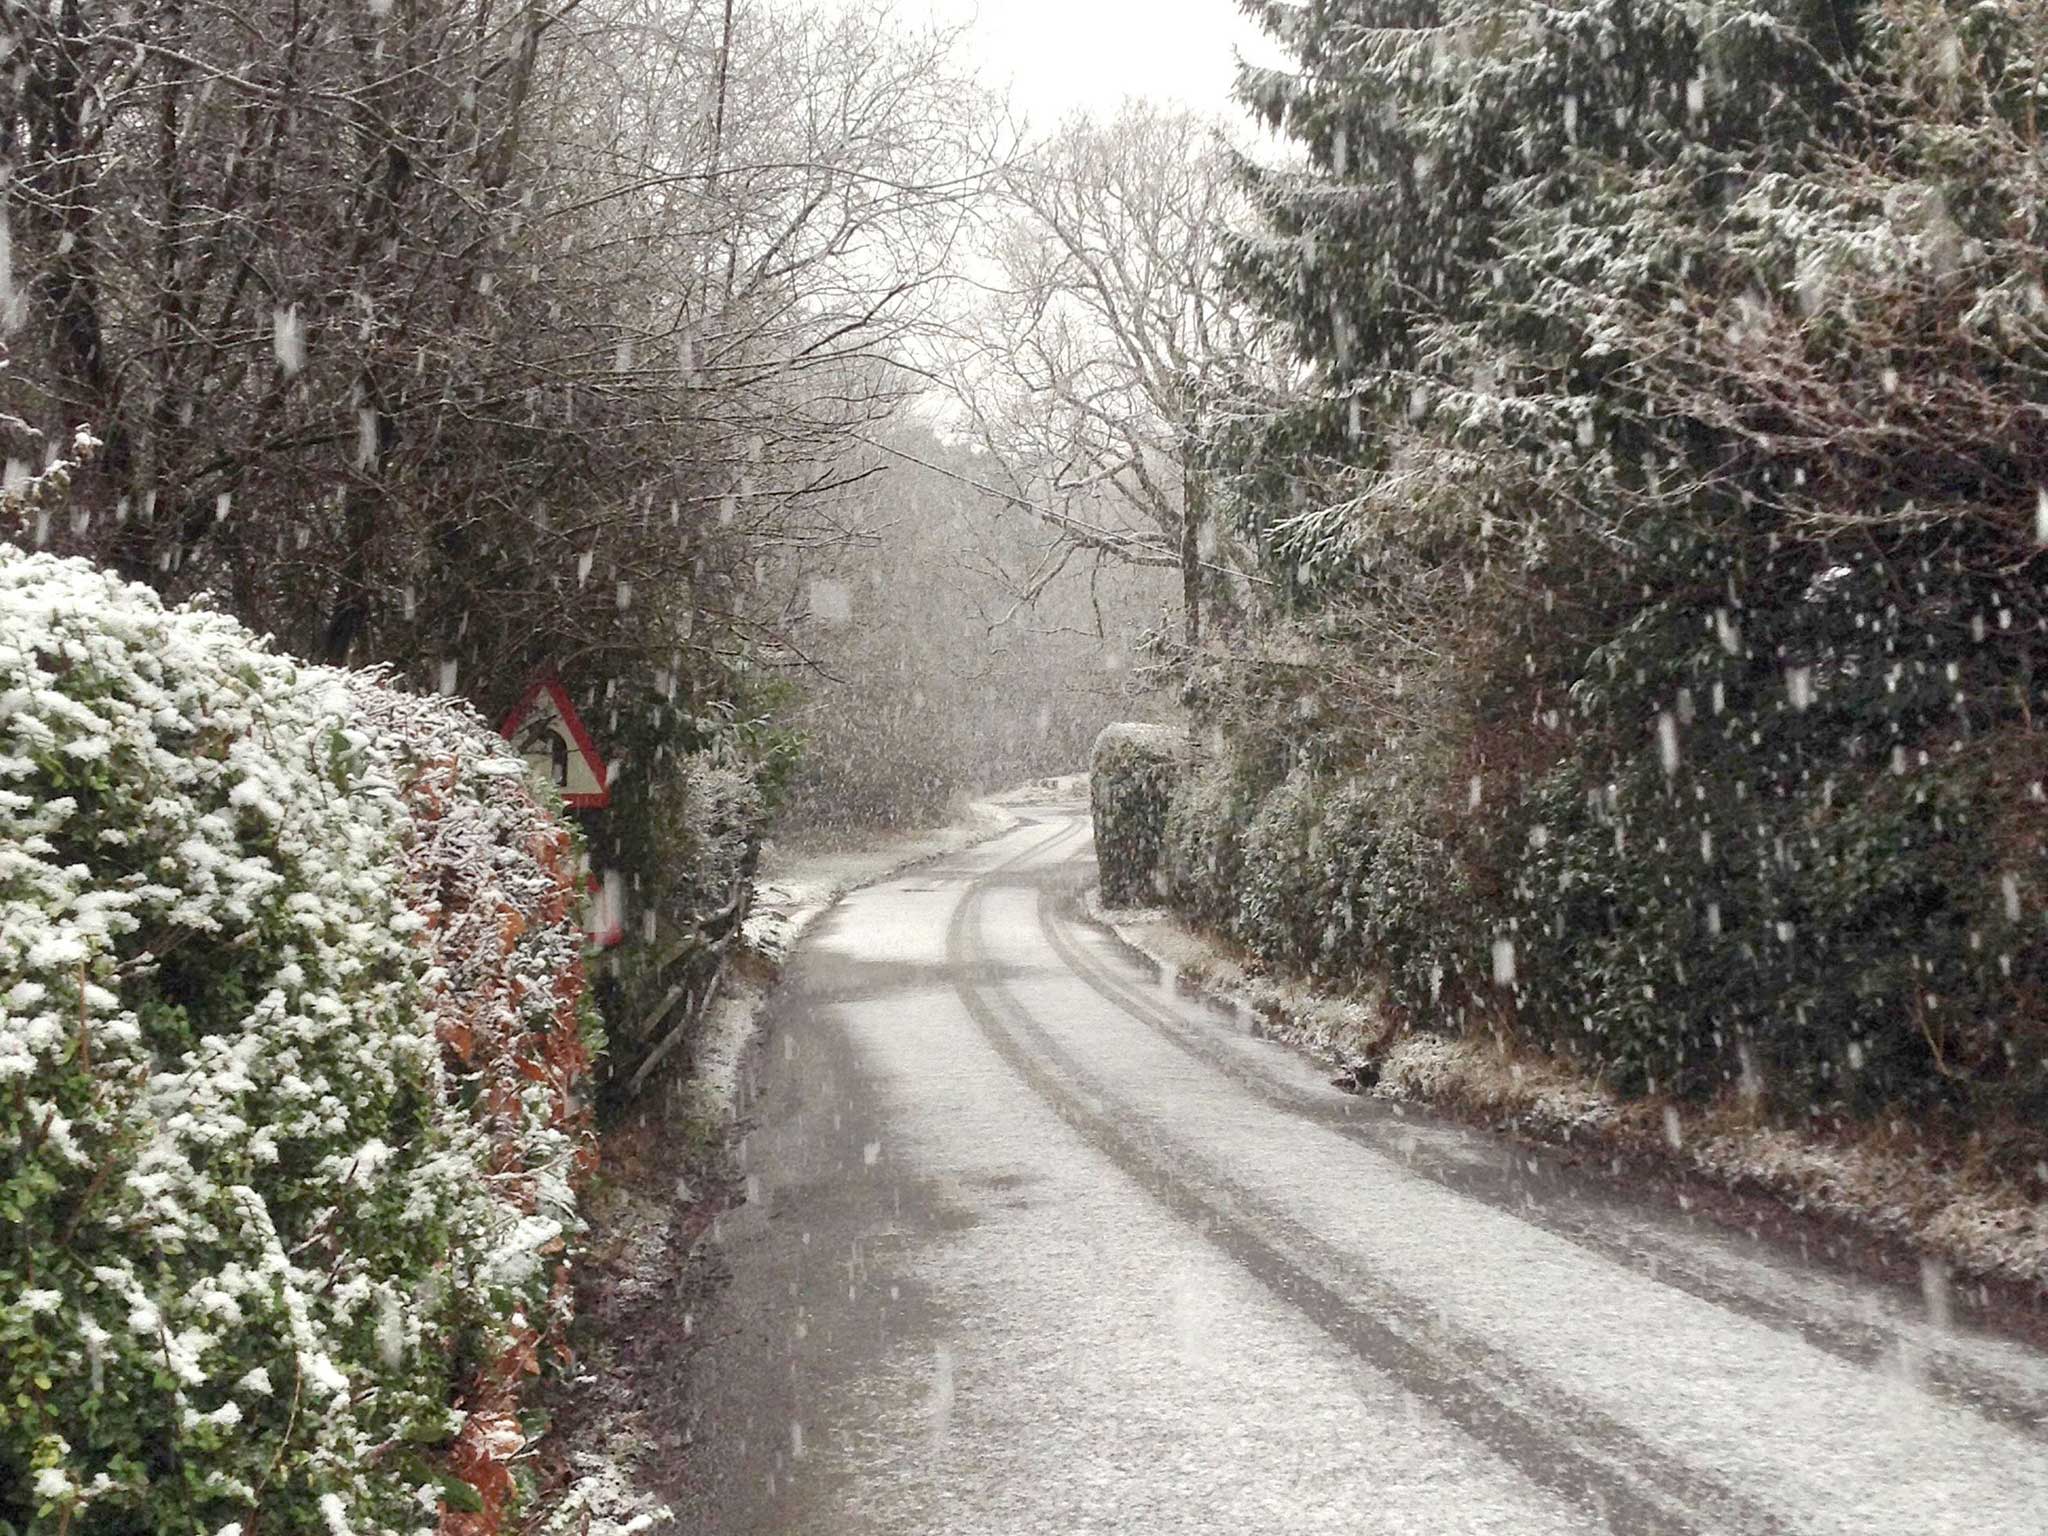 Snow blankets the Sussex lane early this morning